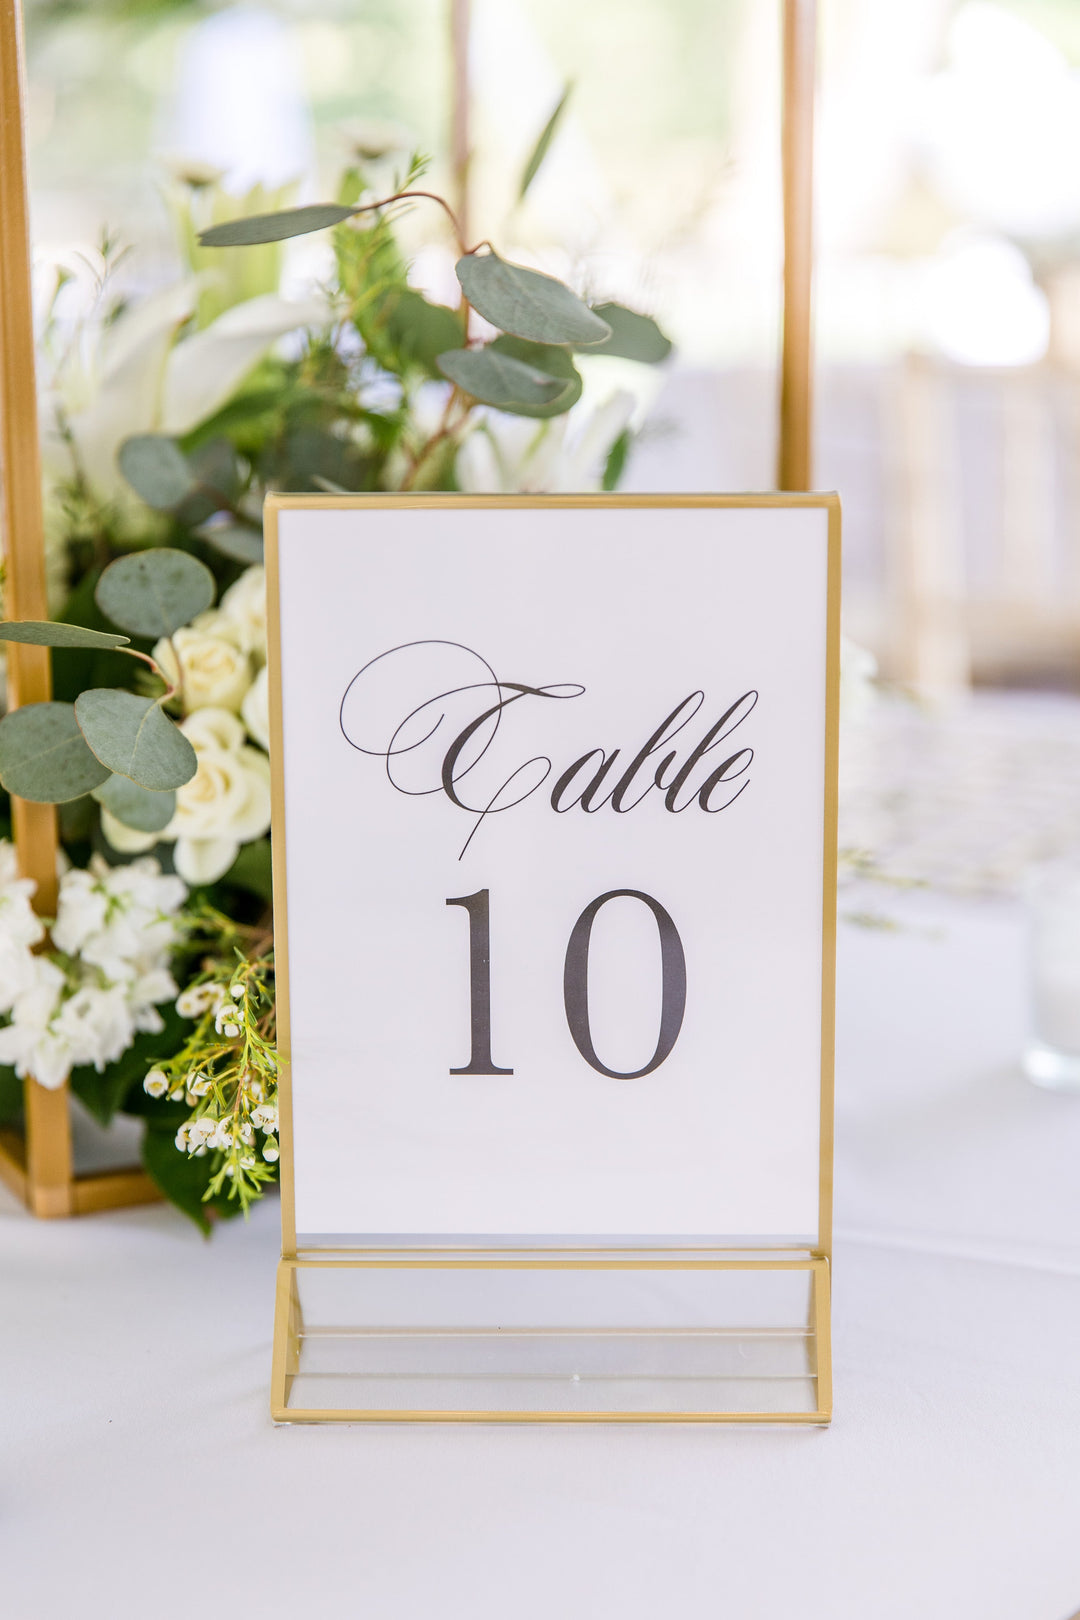 The Mitzi Table Number